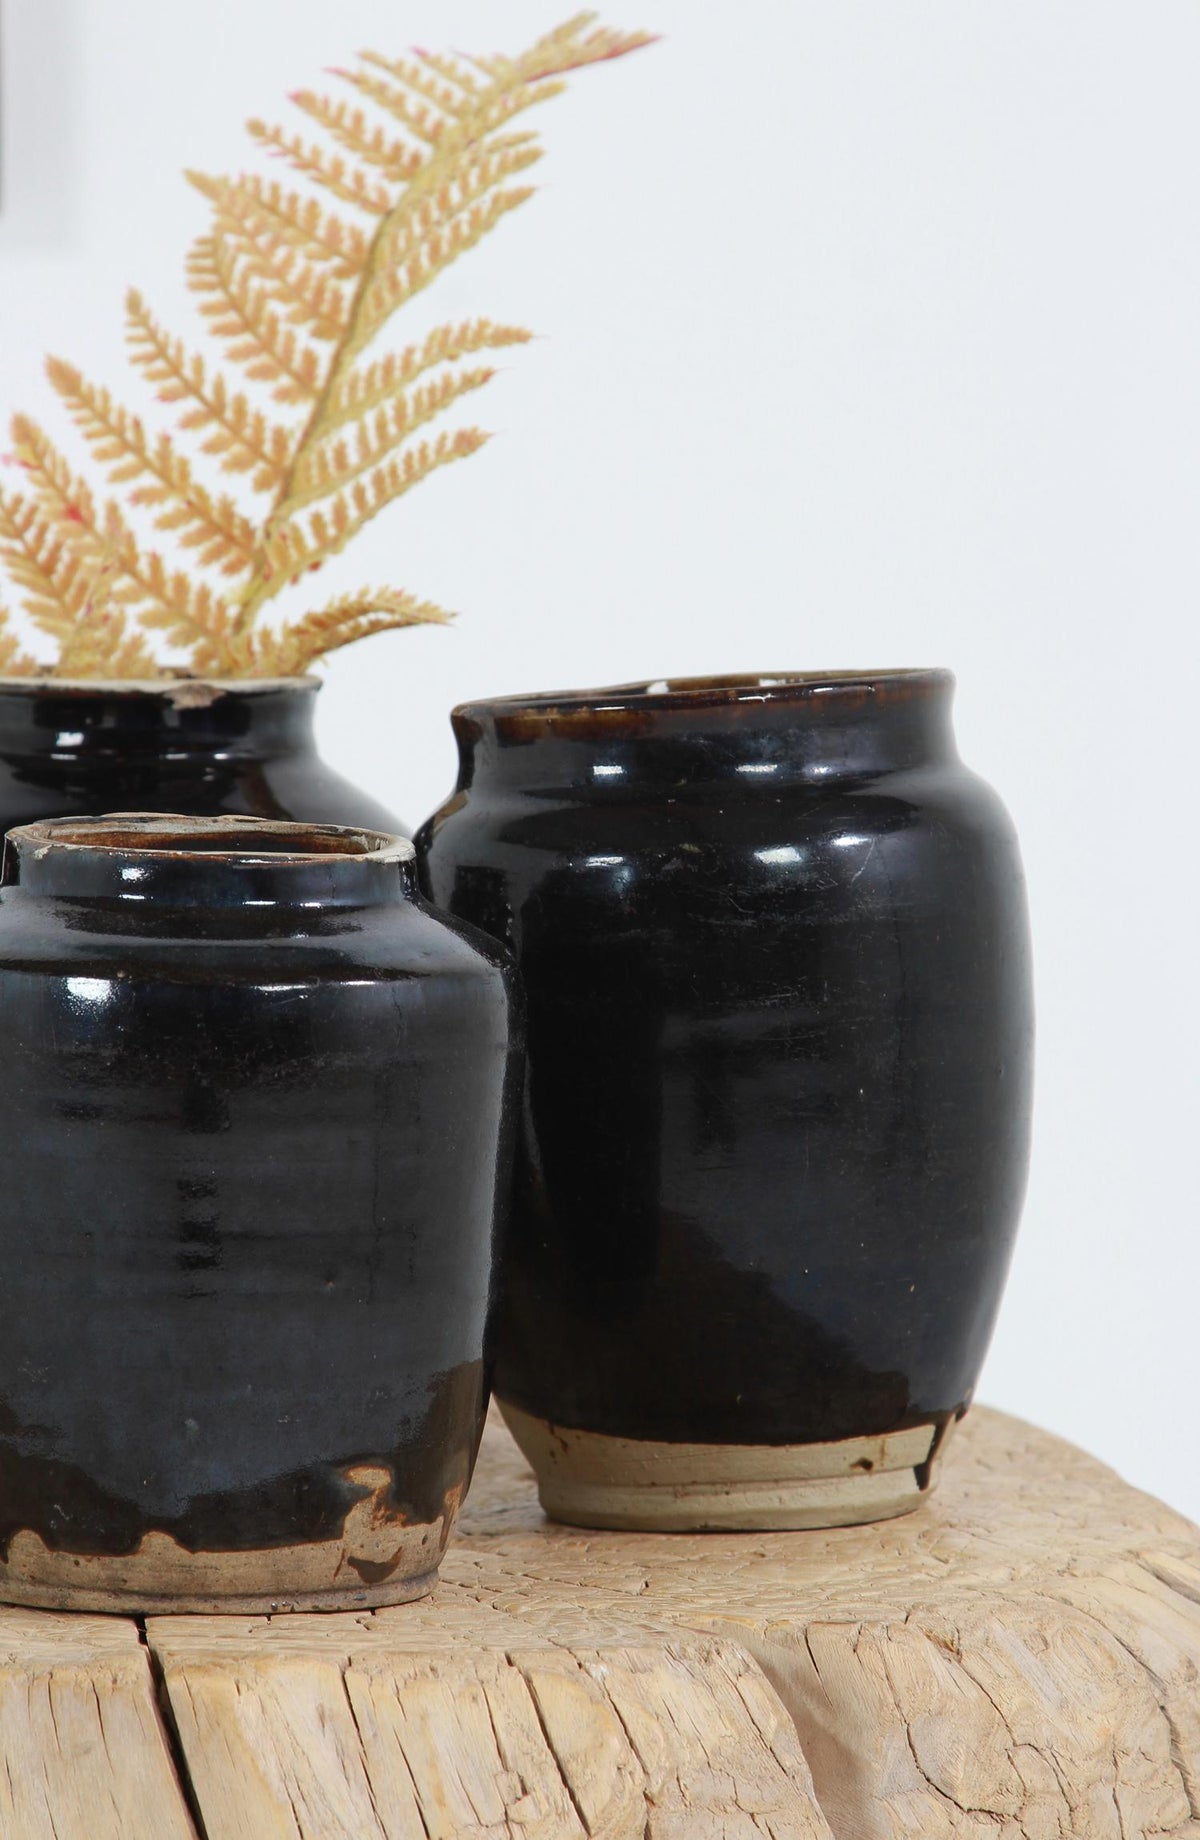 COLLECTION OF FOUR  HANDMADE CHINESE BLACK GLAZED POTTERY JARS